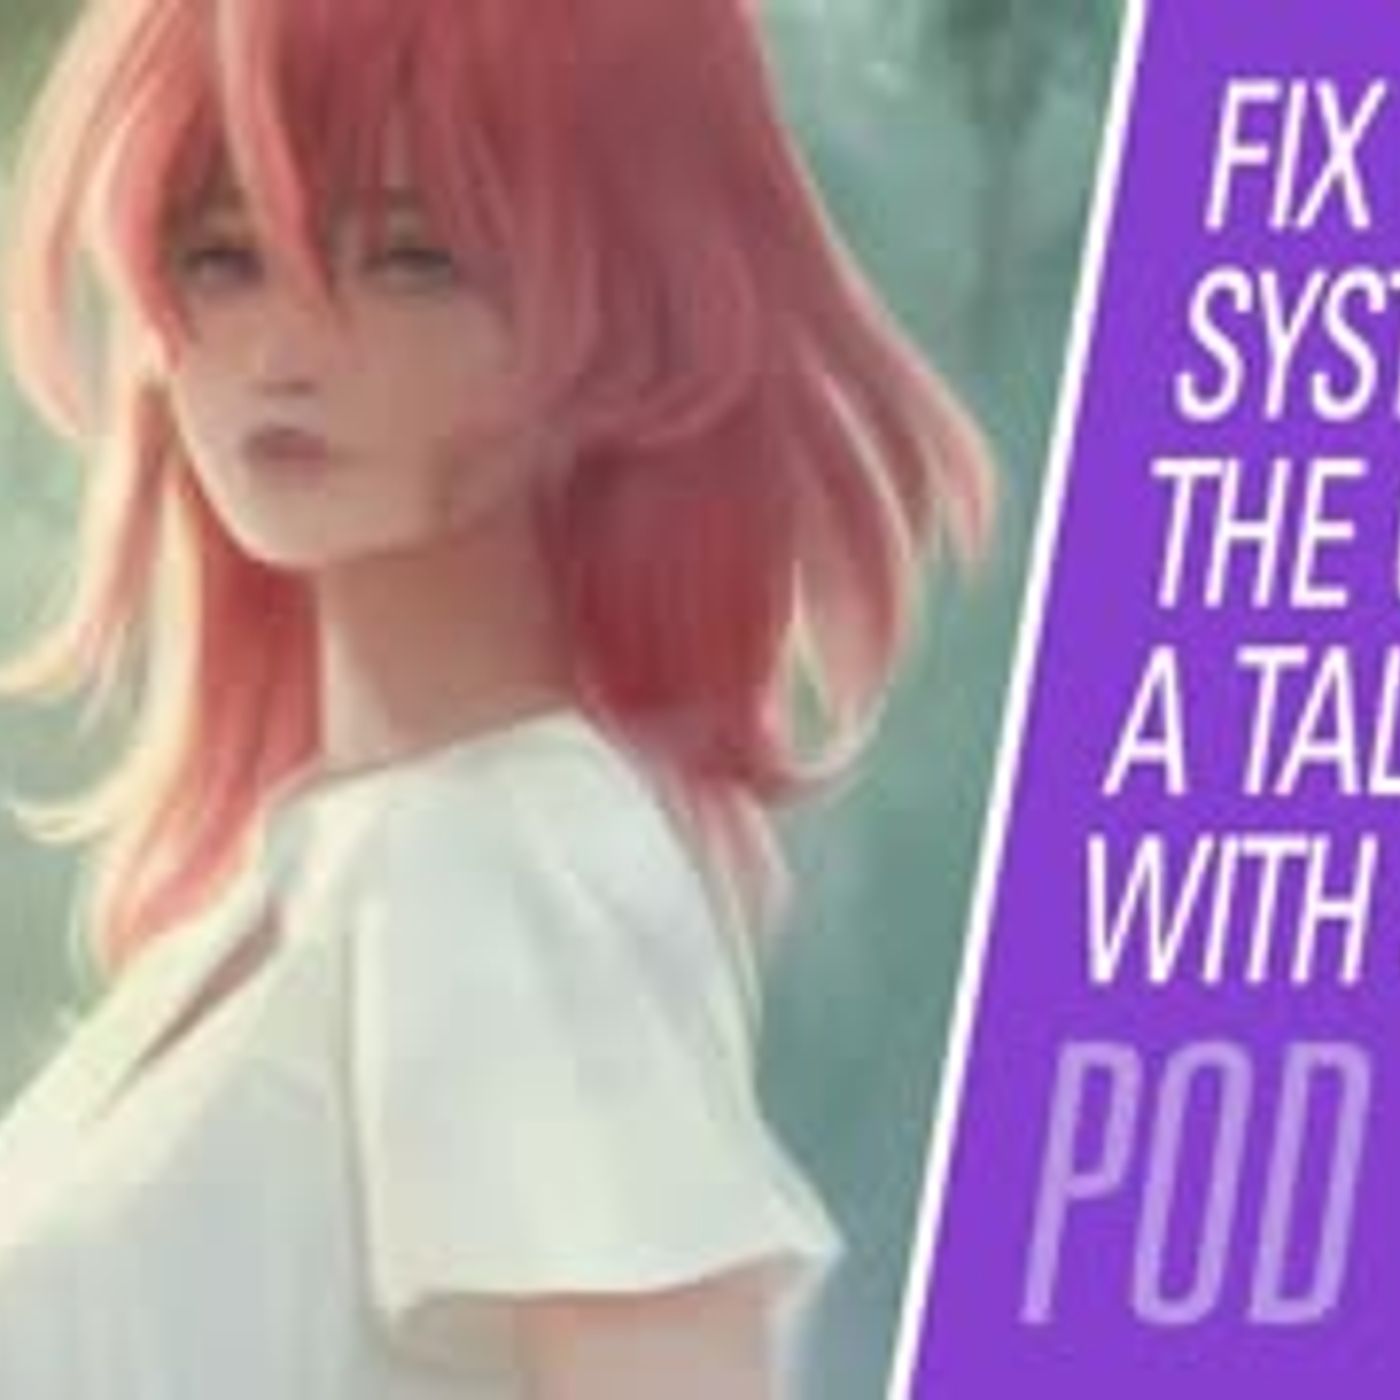 Fix the System and Not the Girls? Talking With Creativity Engineer Savvy! | Badger Pod GamerGate 4